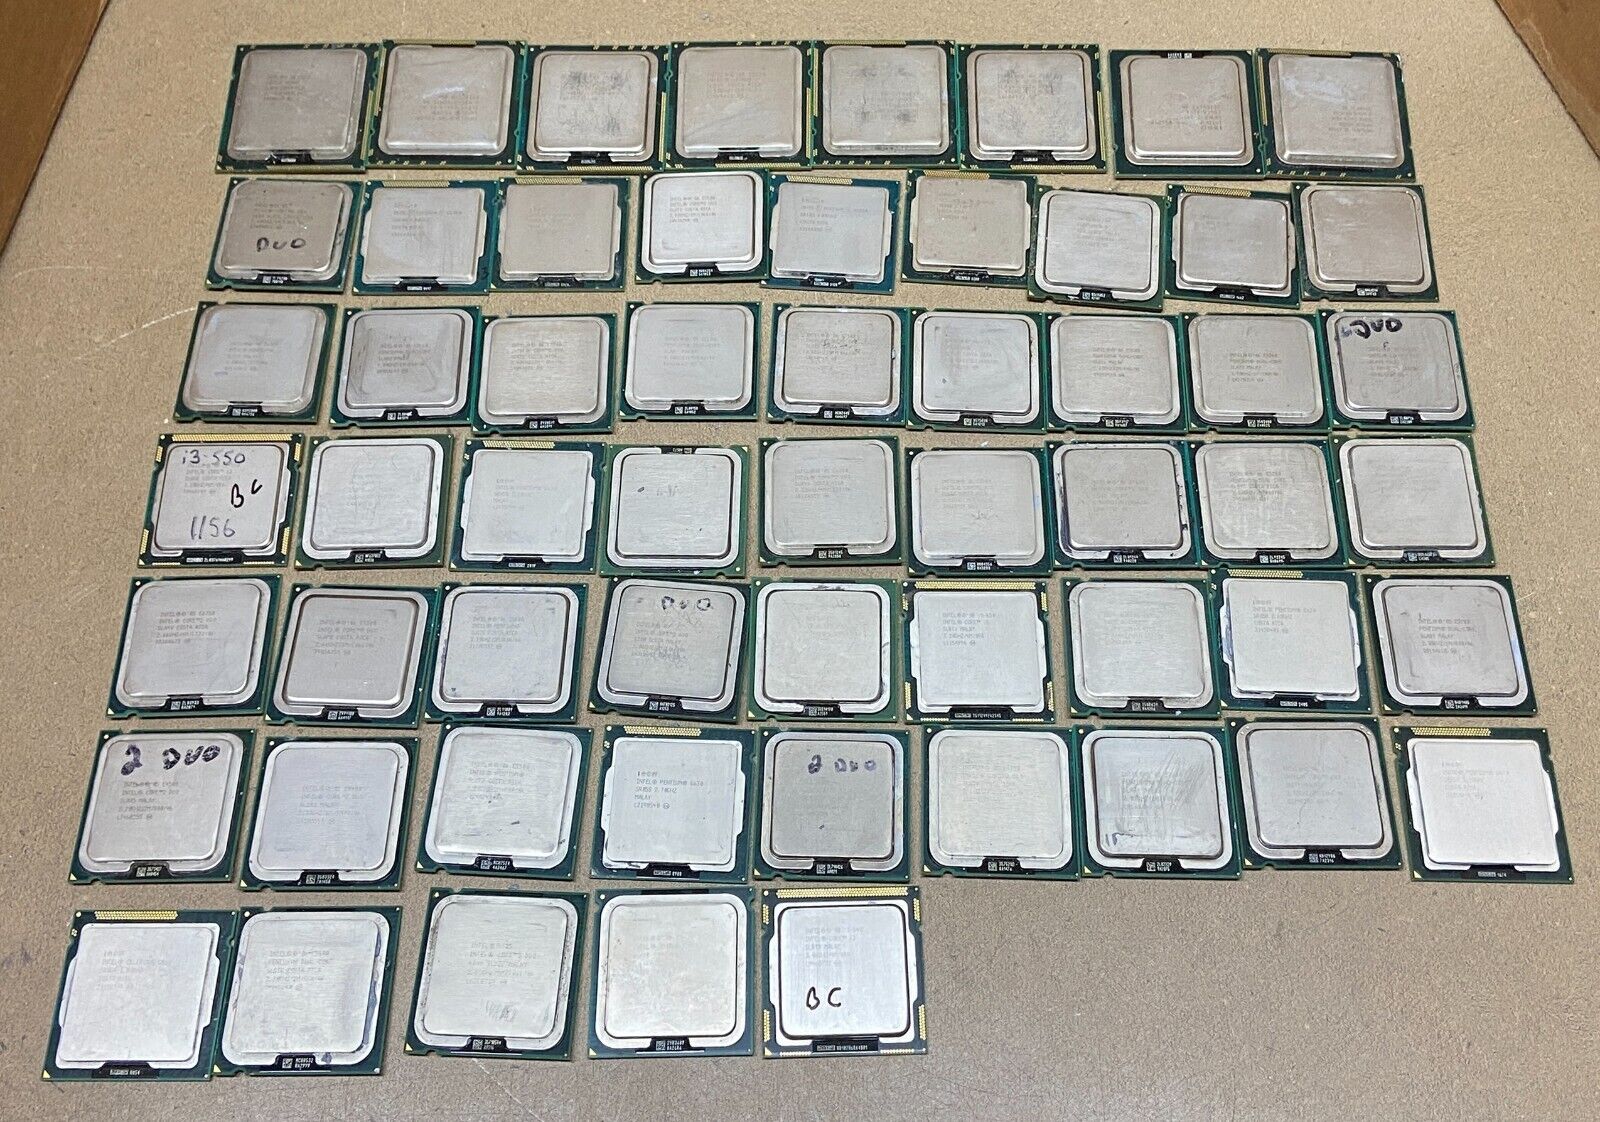 Lot of 58 Intel CPUs Old & Some Broken CPUs For Scrap Use or Projects  3+ Pounds